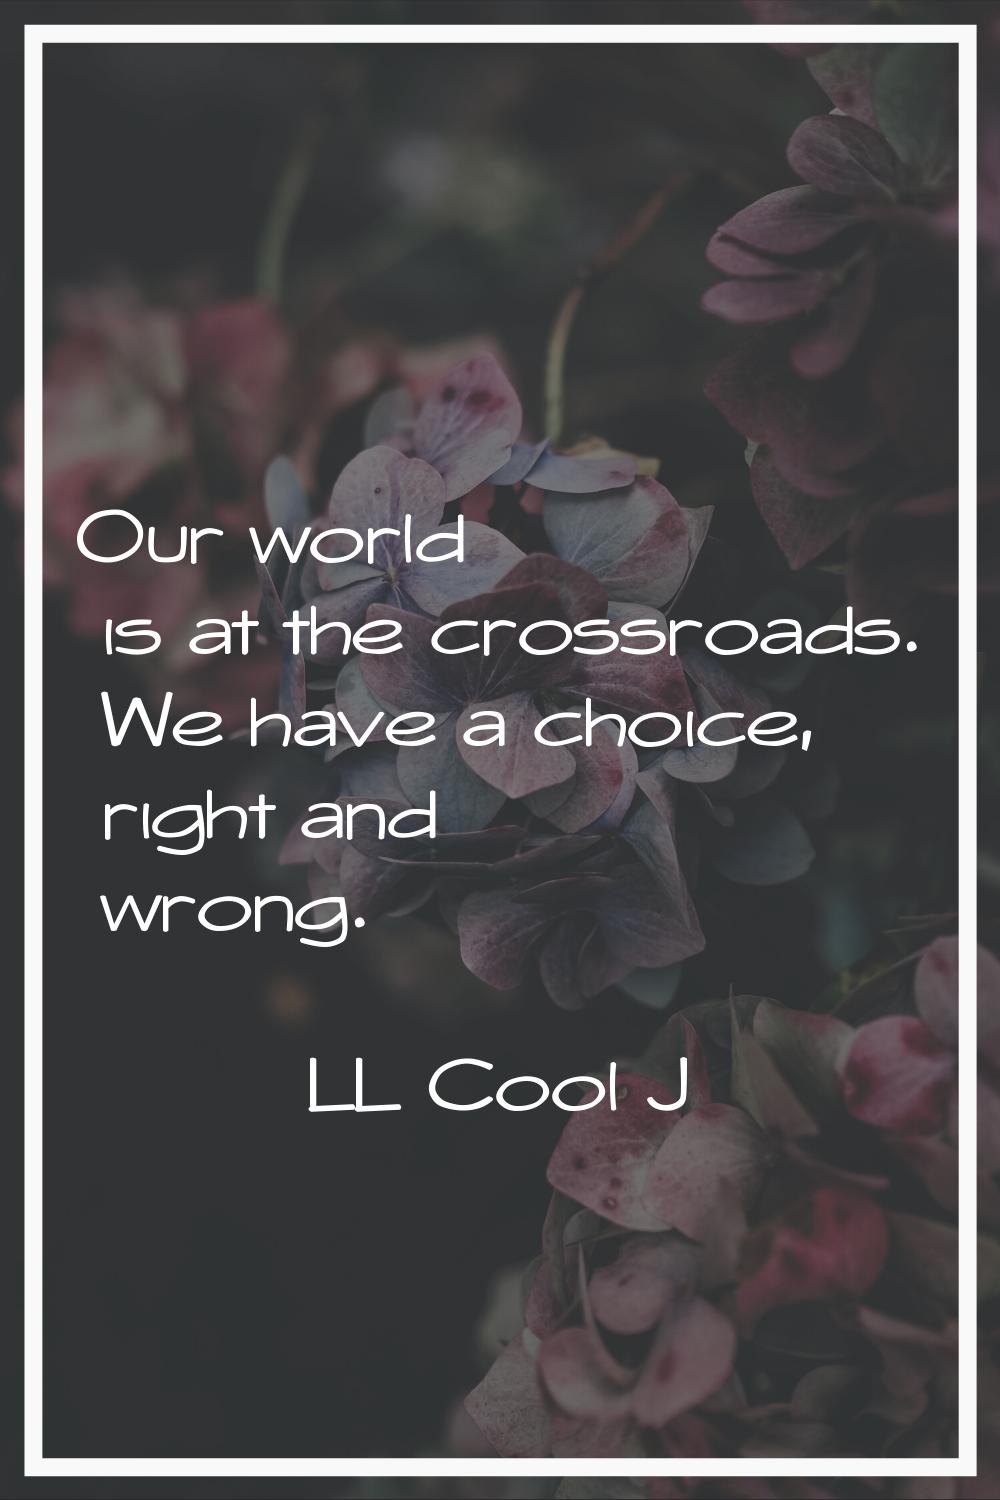 Our world is at the crossroads. We have a choice, right and wrong.